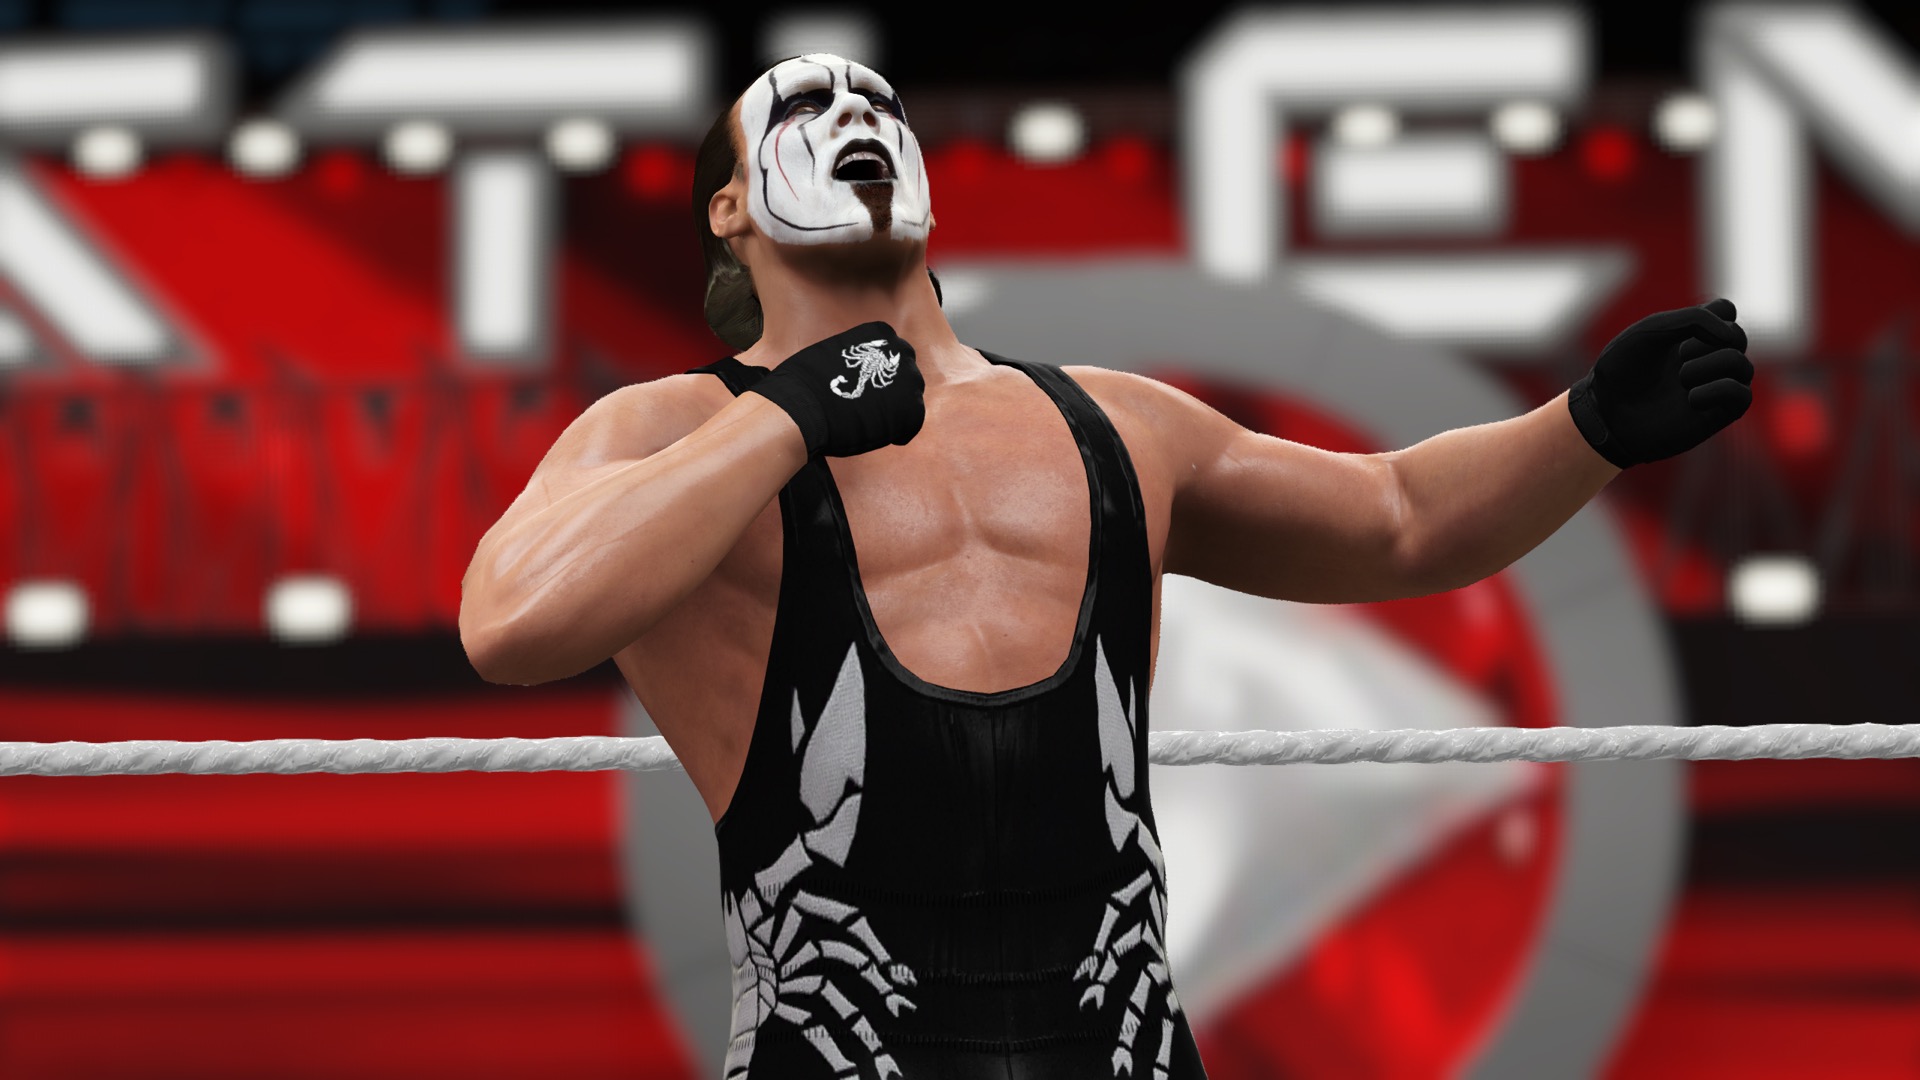 Download wwe 2k16 android Easiest way ever